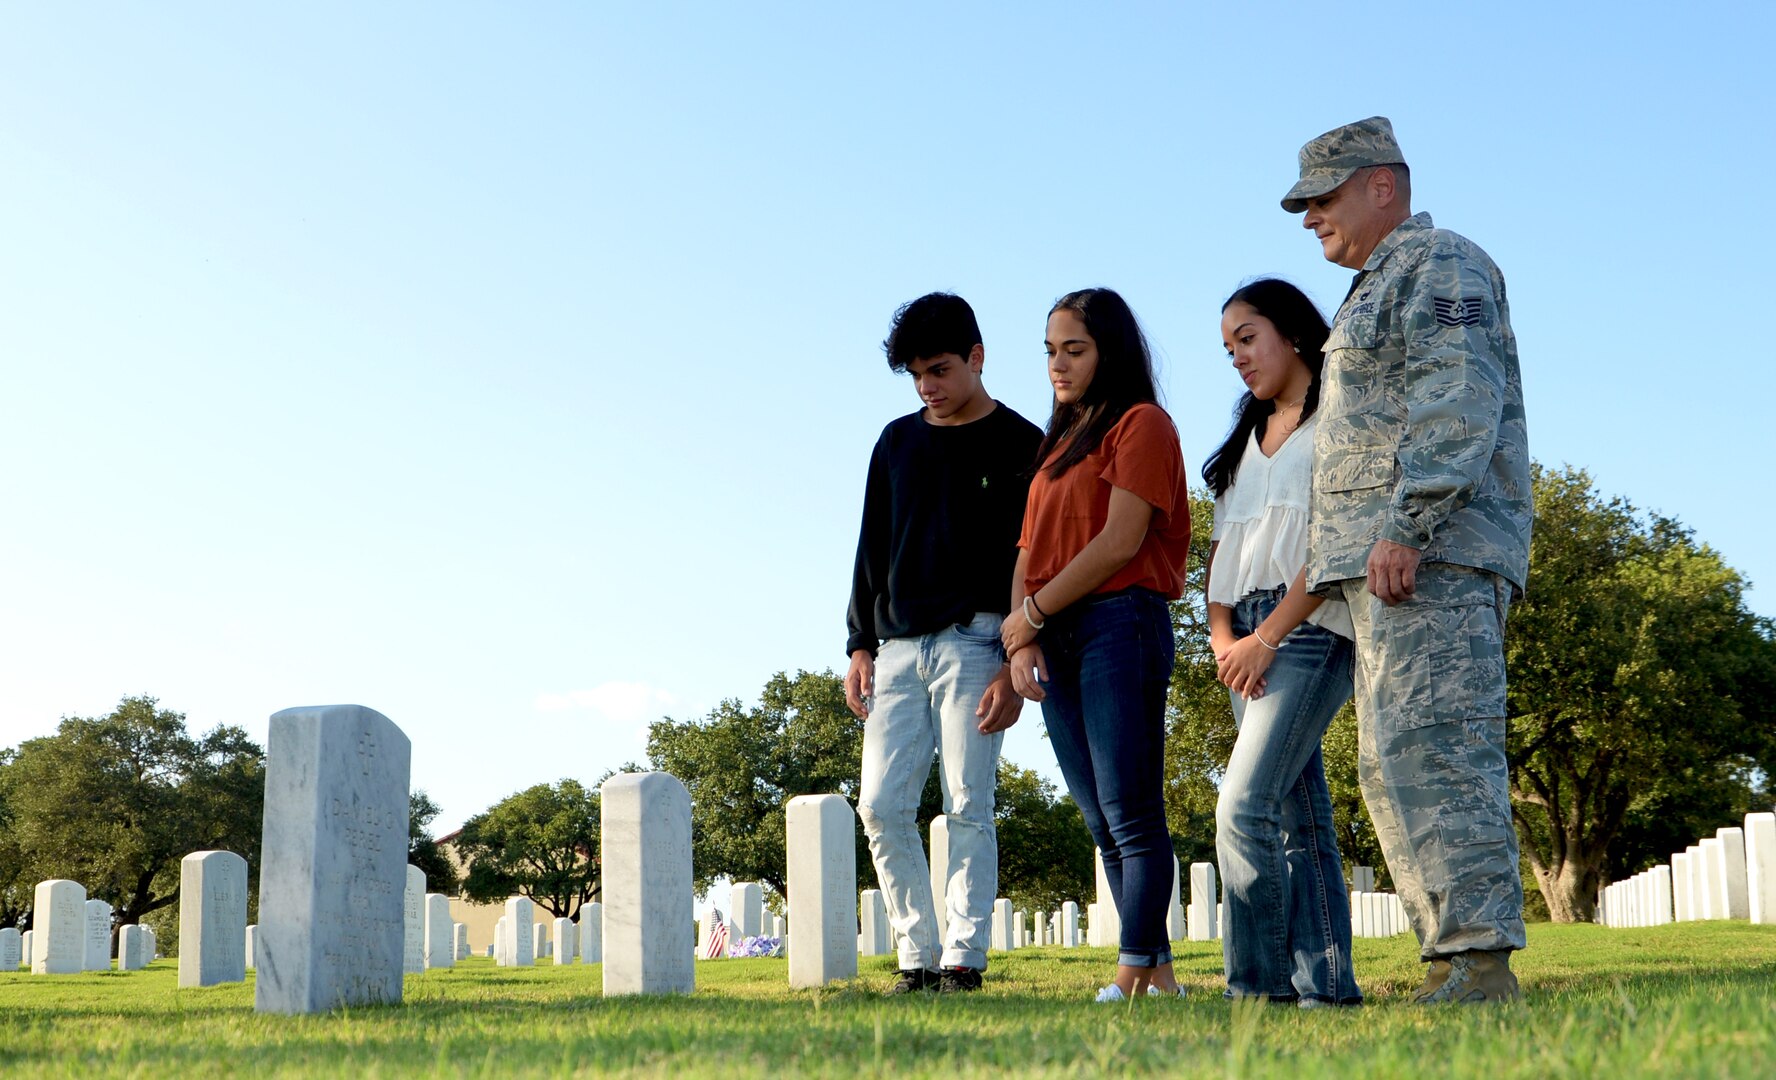 Tech. Sgt. Joseph Perez, 26th Aerial Port Squadron ramp services supervisor, visits the grave of his father Sept. 25, 2020, with his family at Fort Sam Houston Cemetery, San Antonio, Texas. (U.S. Air Force photo by Tech. Sgt. Samantha Mathison)